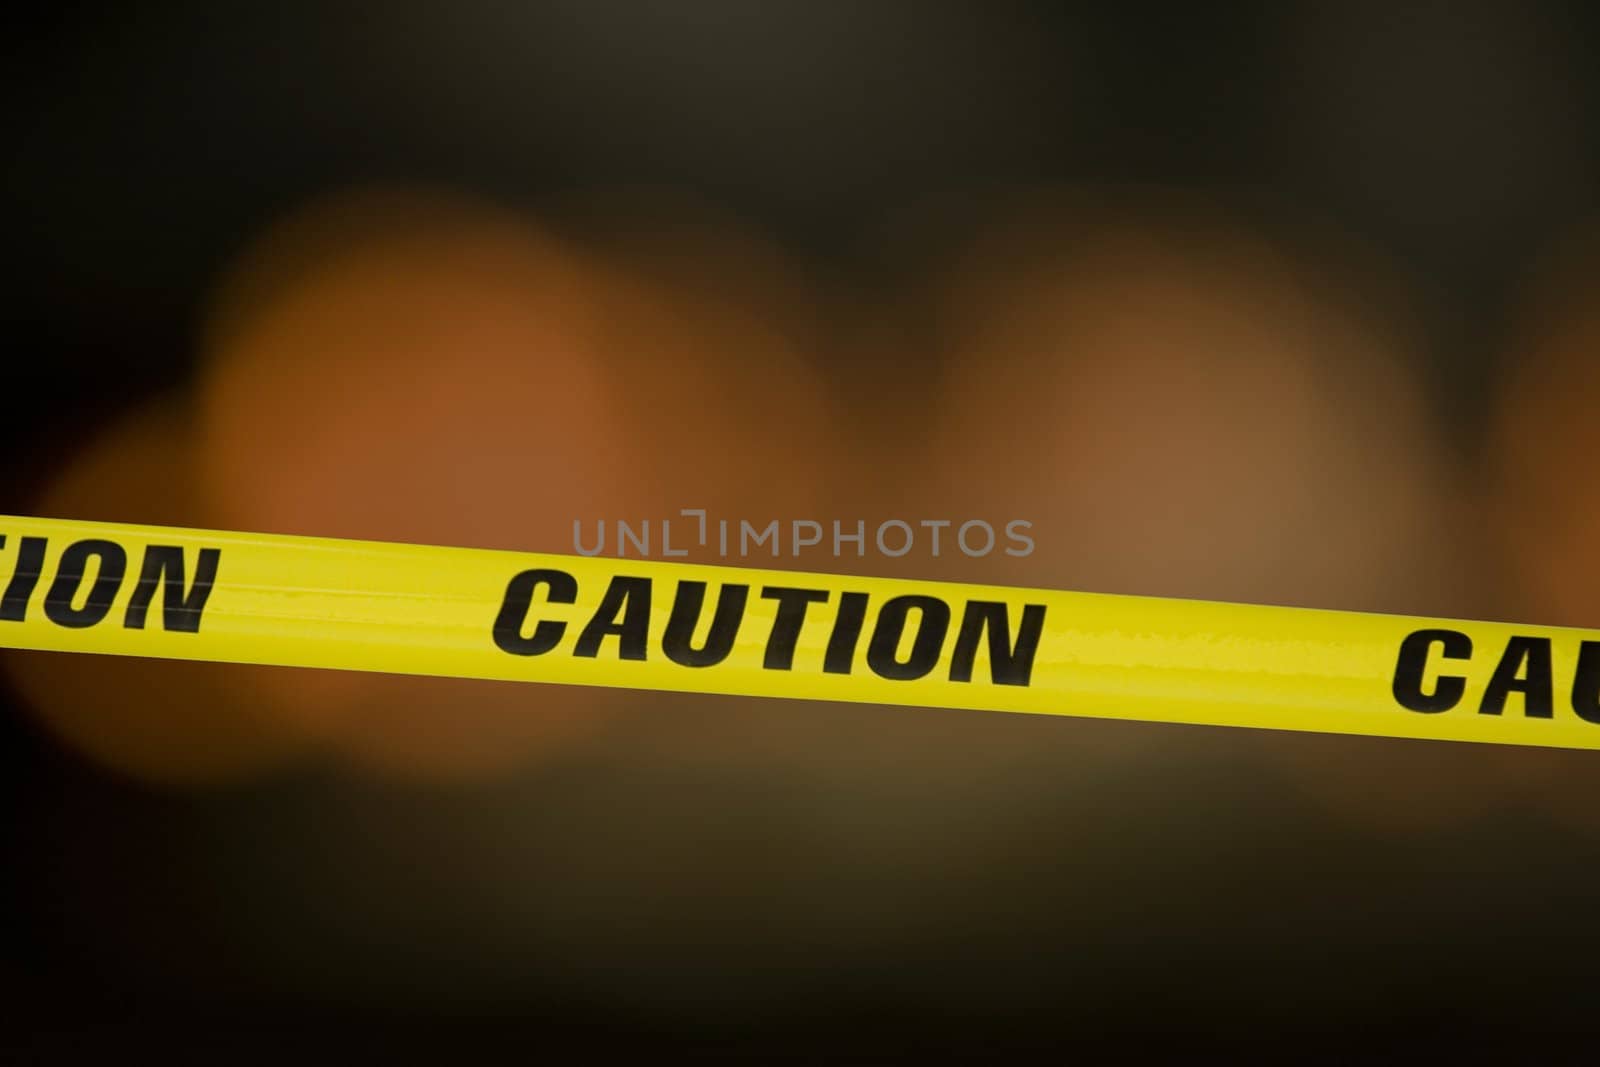 Caution tape over a black background with flashing lights in the background